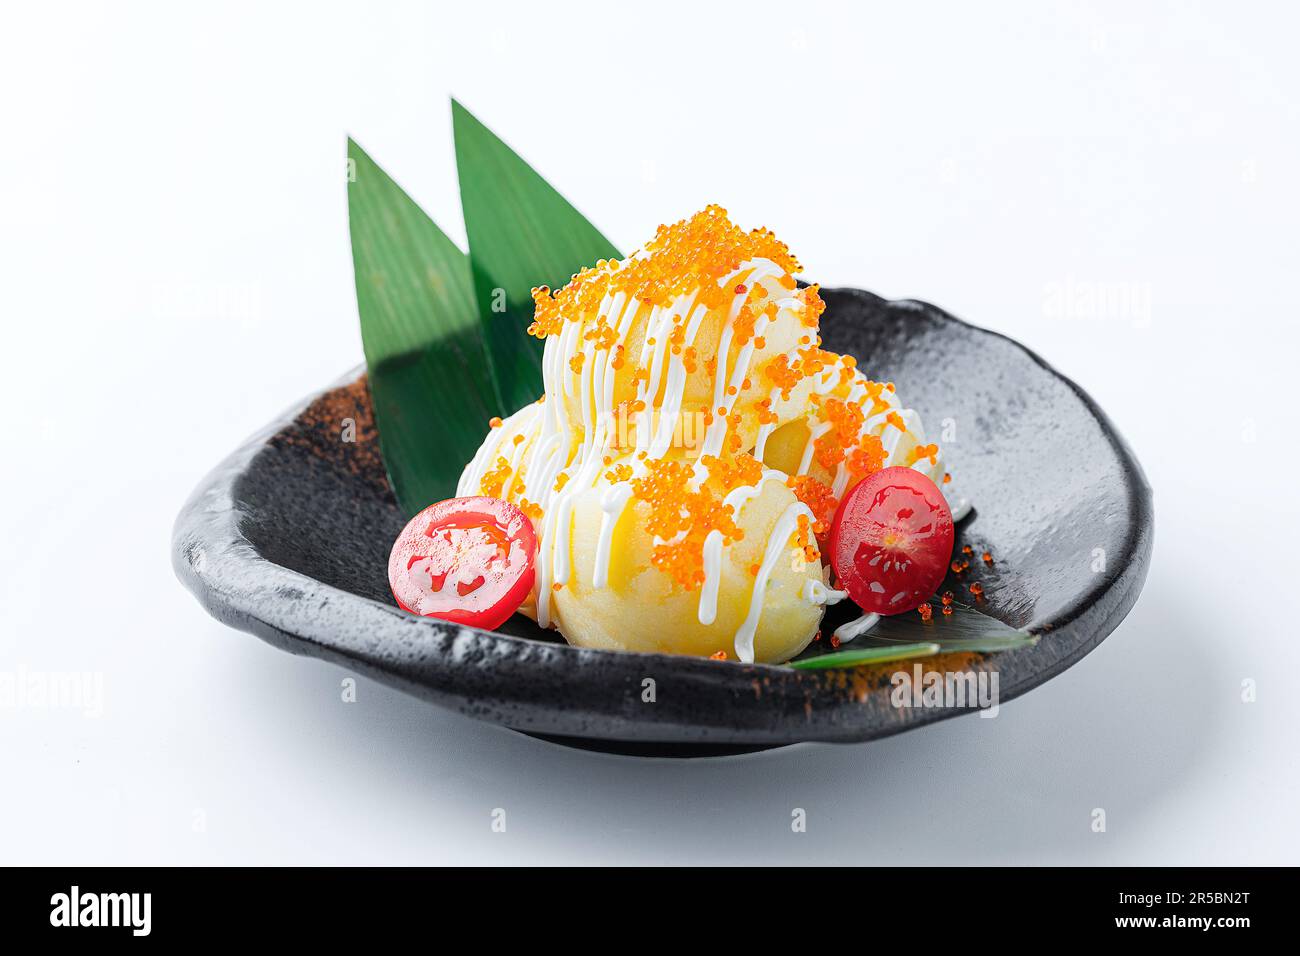 Japanese mashed potato salad drizzled with sweet kewpie mayo and topped with fresh salmon fish egg roe served at a sushi restaurant., Japanese food. Stock Photo